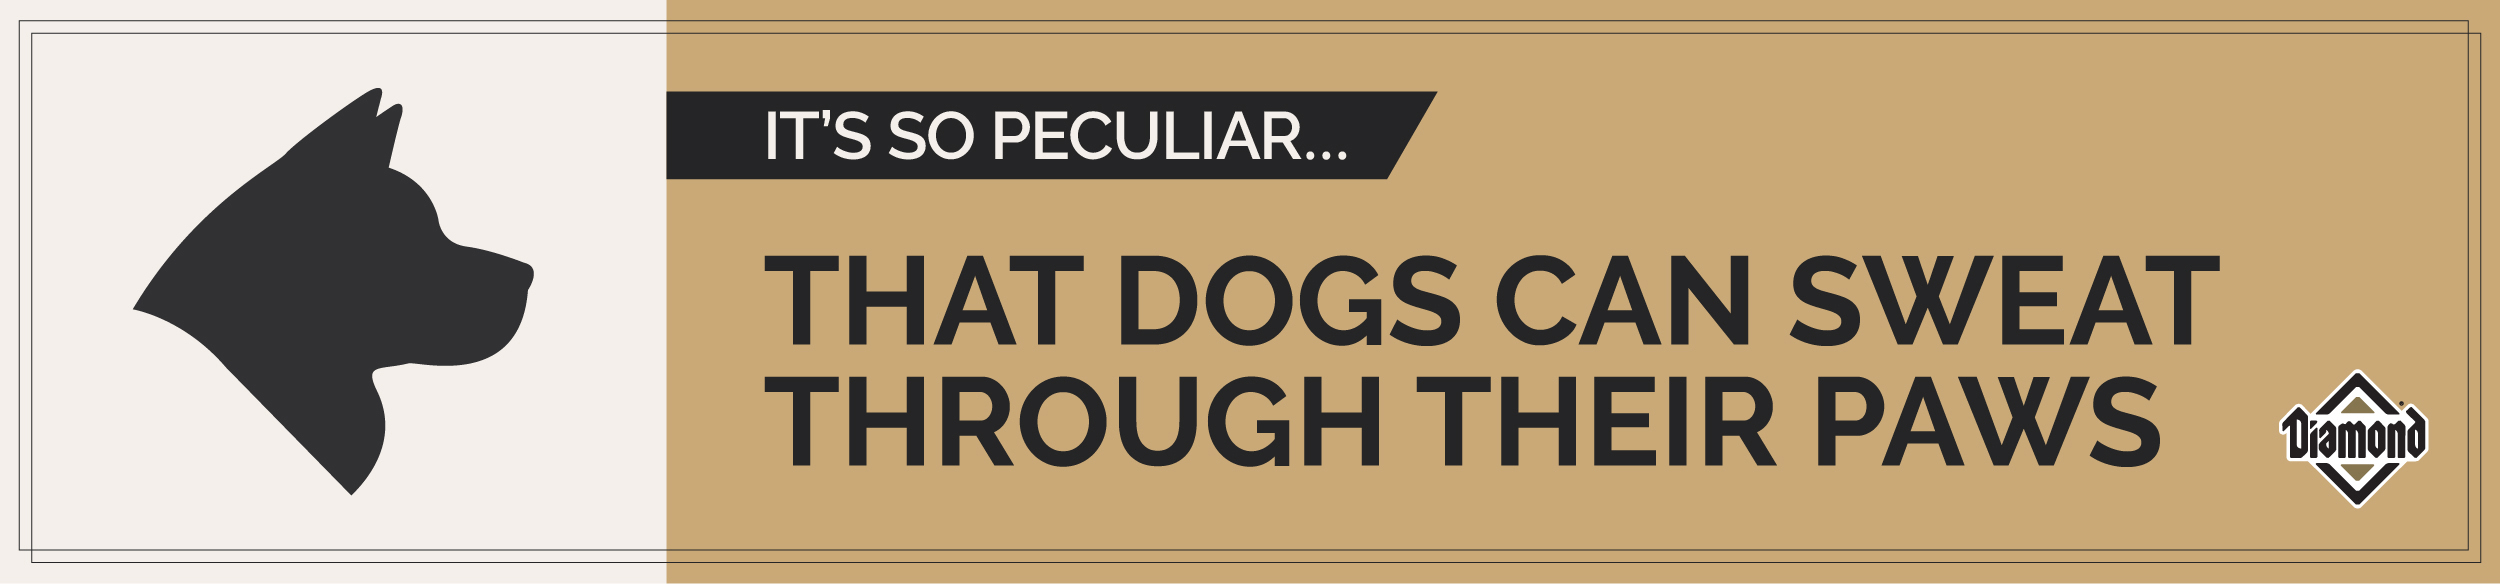 It’s So Peculiar: Dogs Can Sweat Through Their Paws Infographic | Diamond Pet Foods